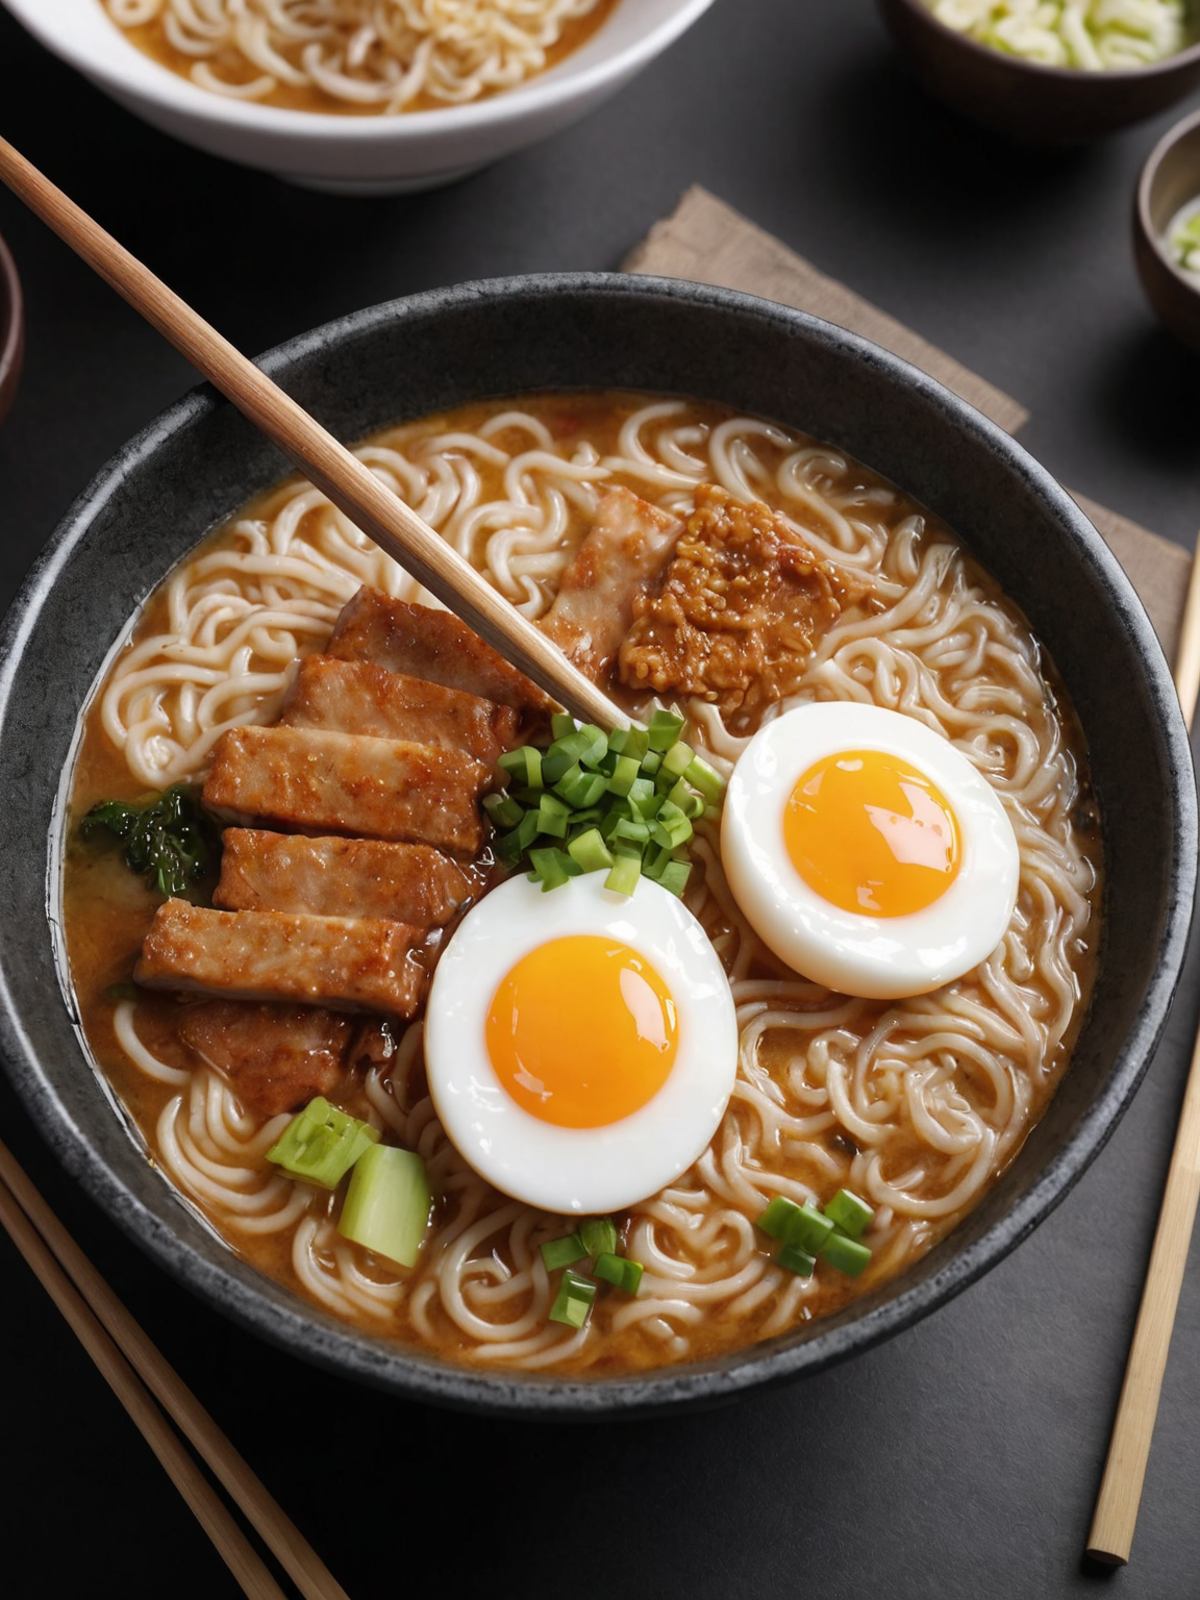 Chow Mein Noodles with Eggs and Meat in a Black Bowl